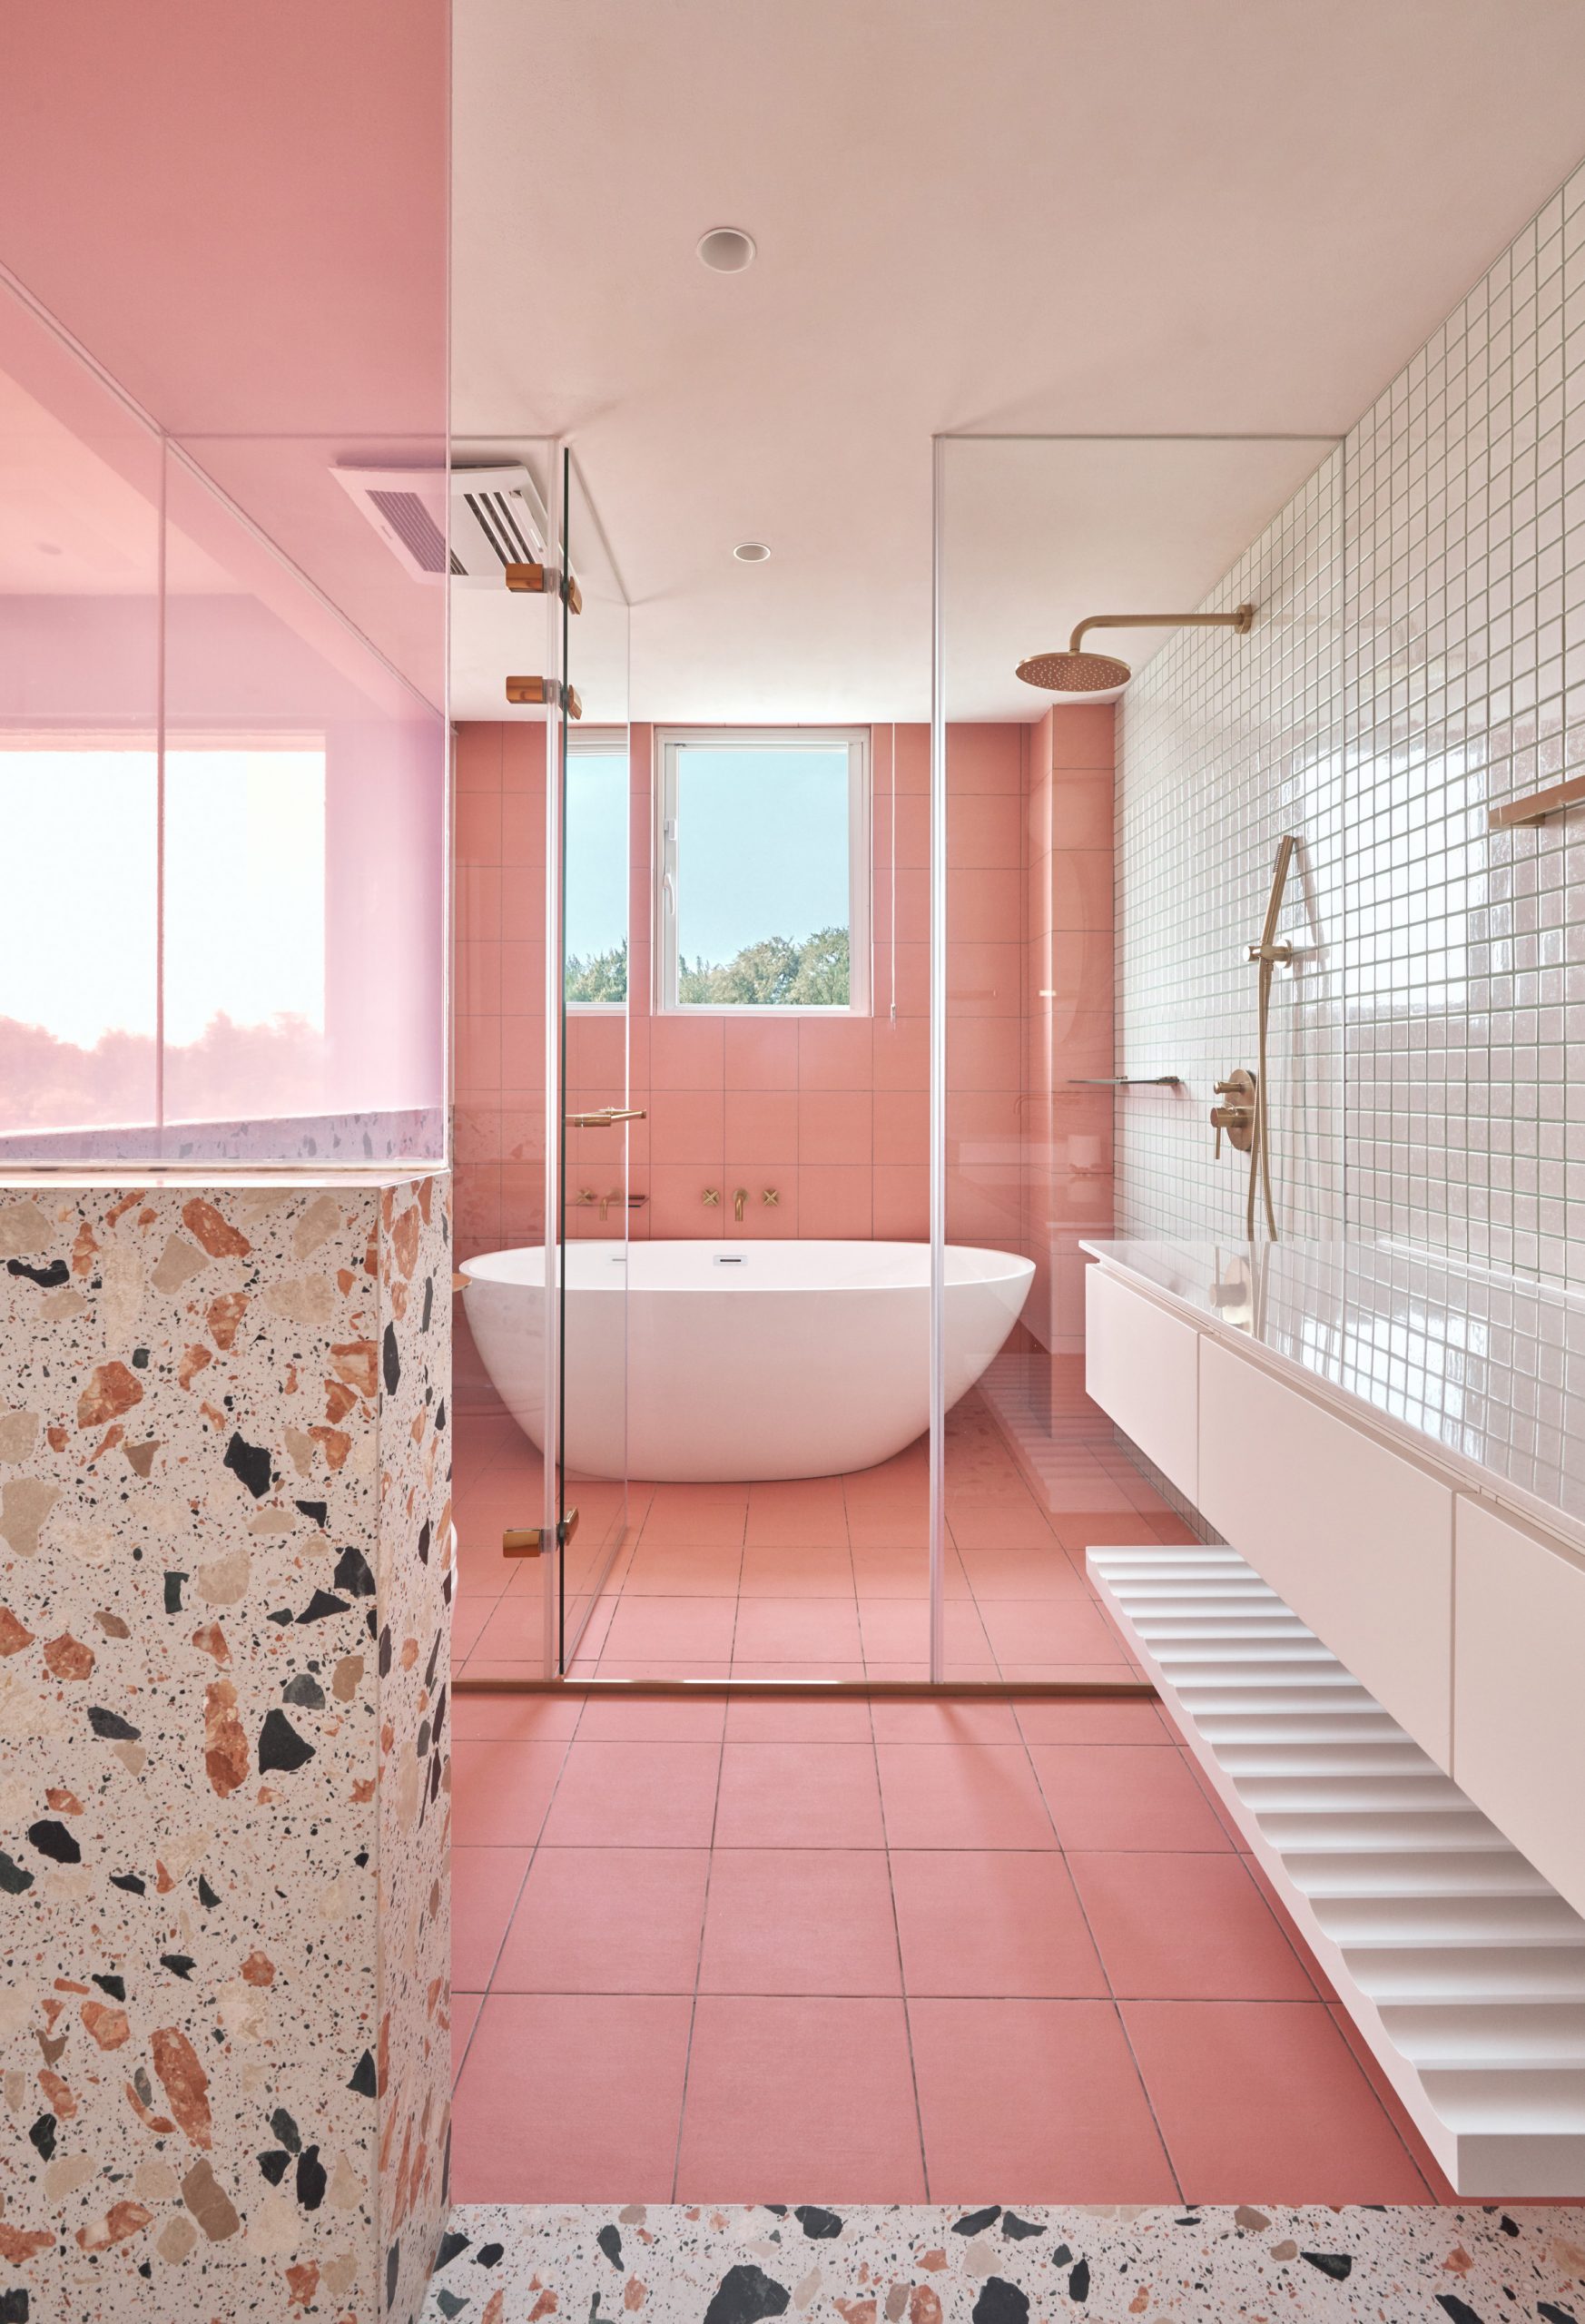 Bathroom with pink tiles